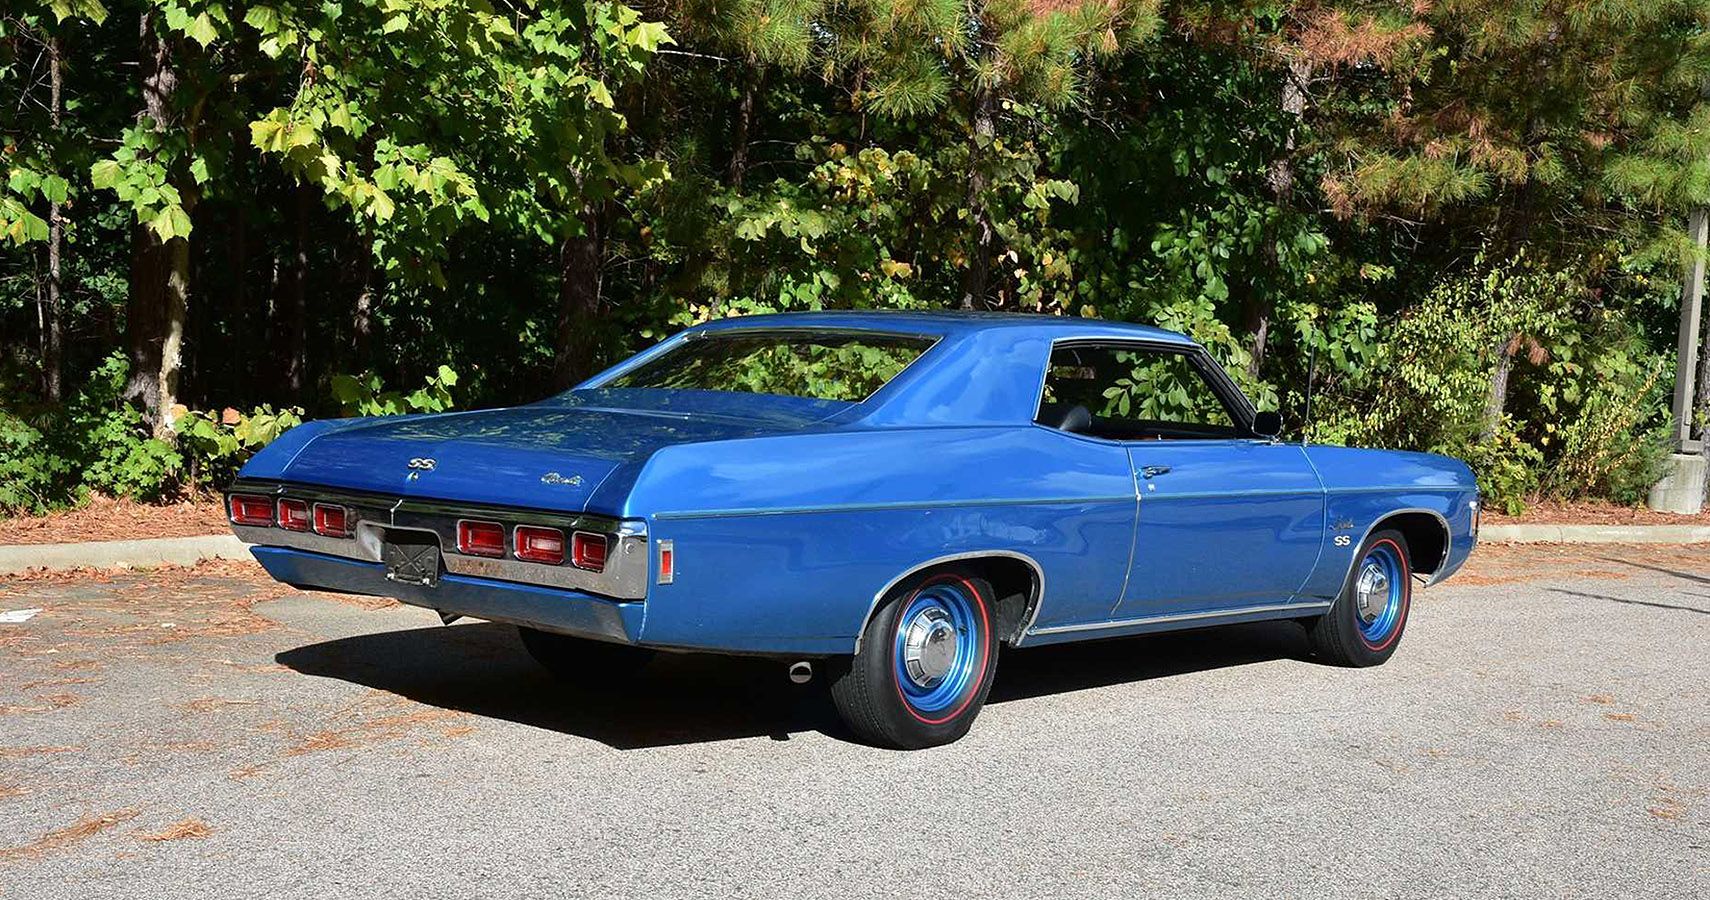 For 1969, The Chevy Impala SS Could Be Called A Muscle Car